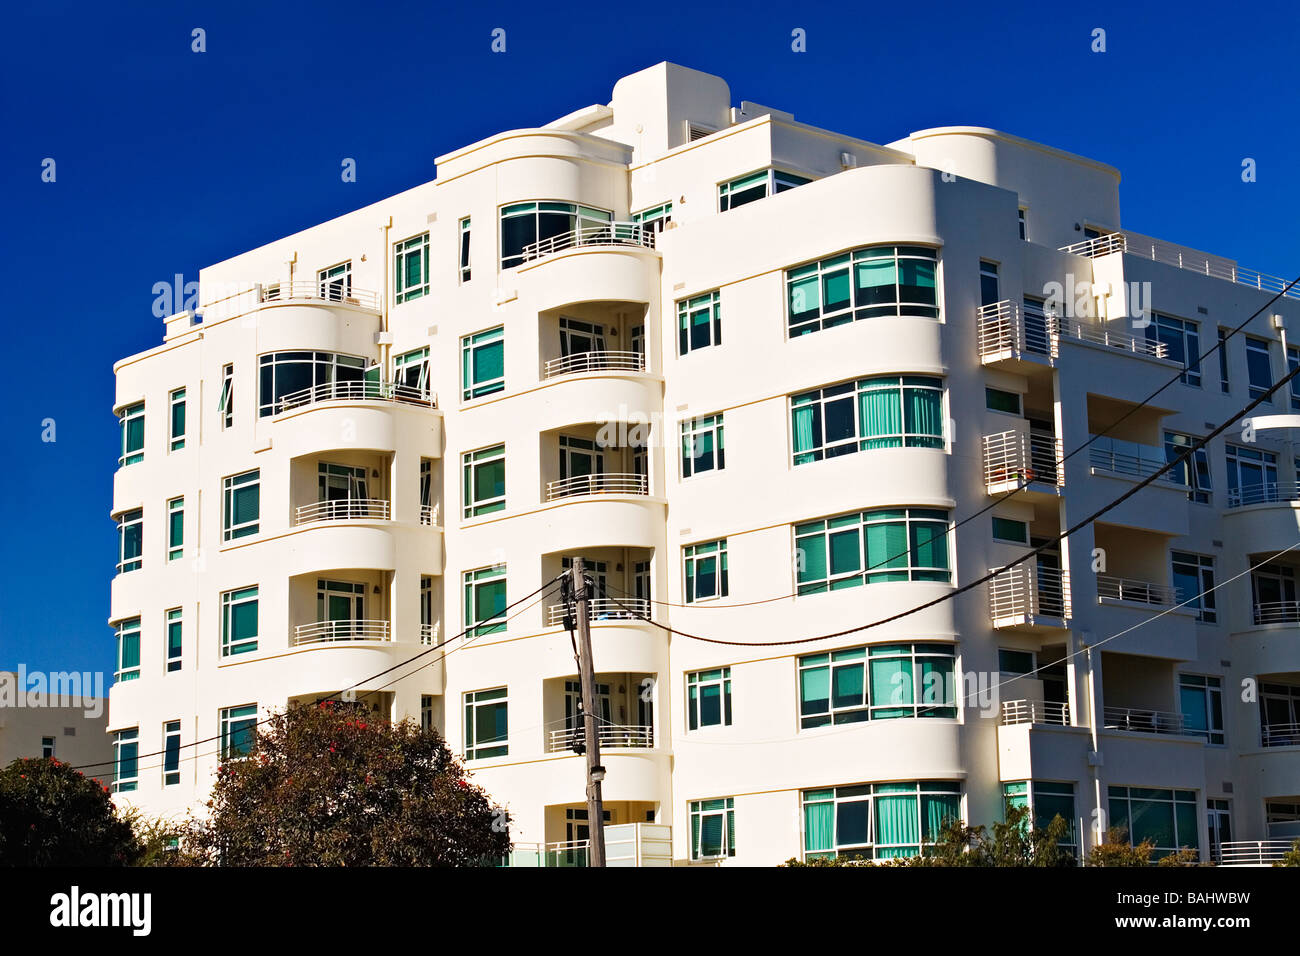 Architecture / Modern residential apartments.The location is the Suburb of Port Melbourne / Melbourne Victoria Australia. Stock Photo